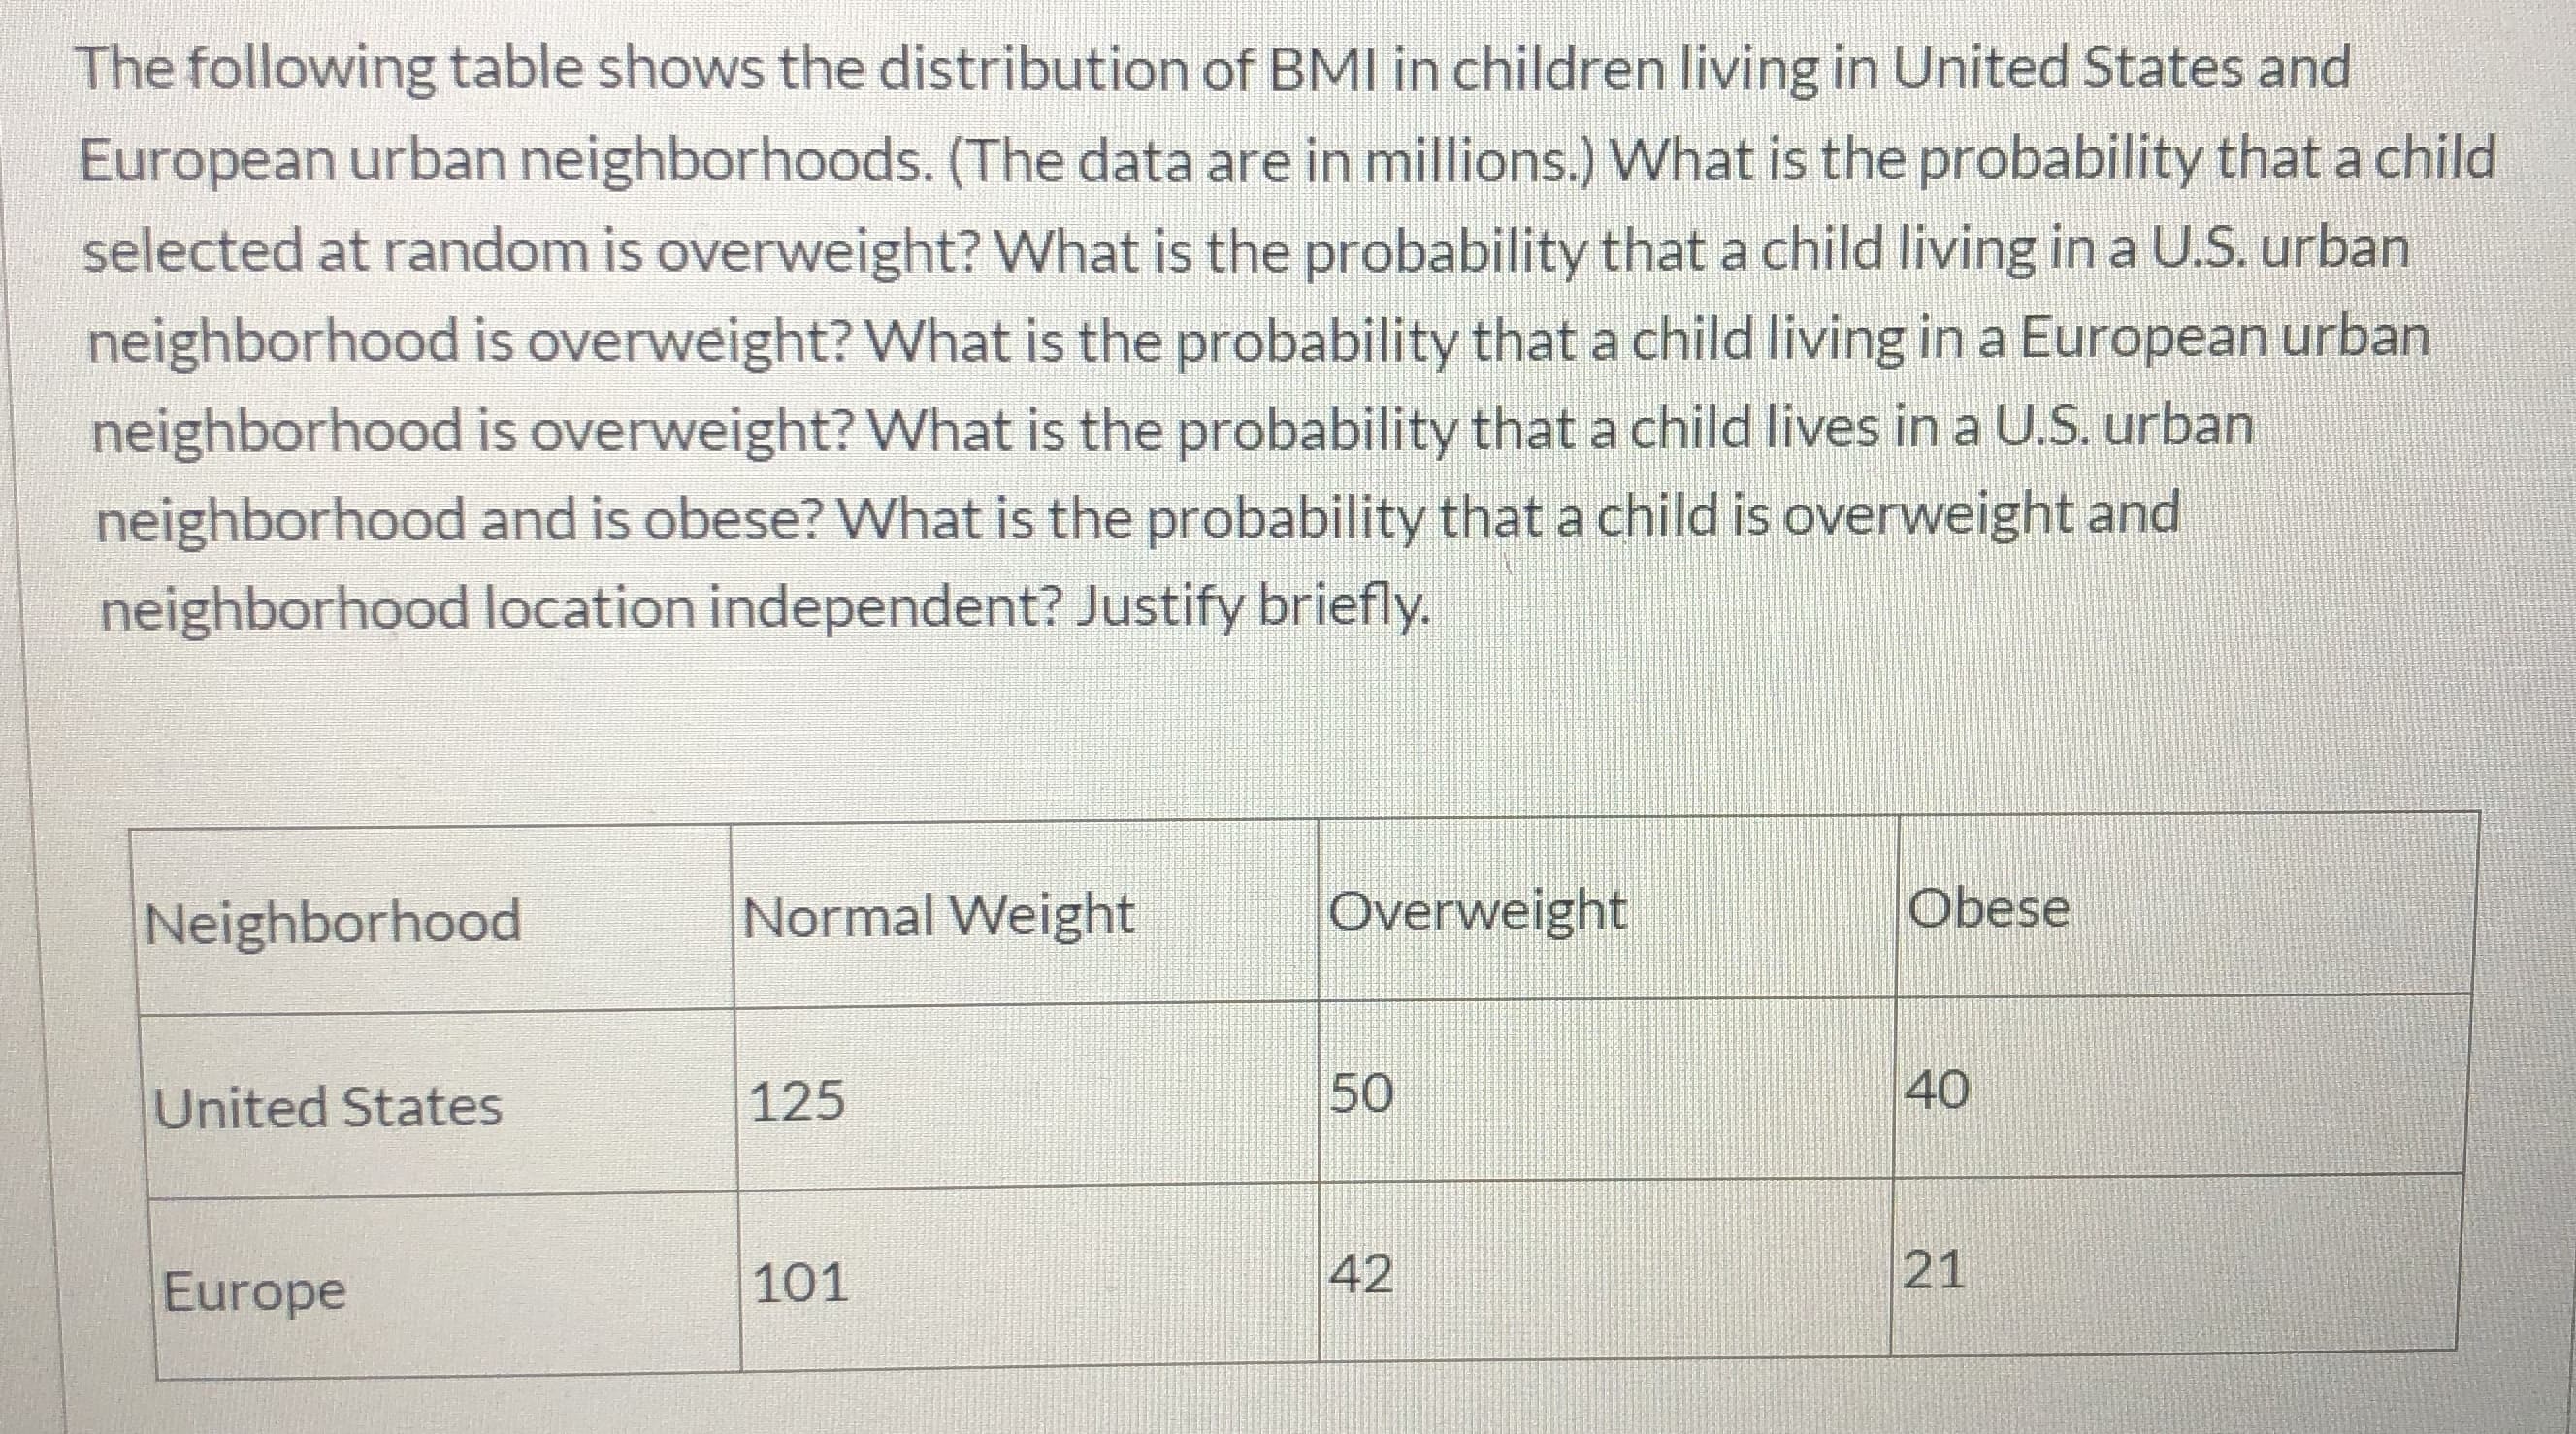 The following table shows the distribution of BMI in children living in United States and
European urban neighborhoods. (The data are in millions.) What is the probability that a child
selected at random is overweight? What is the probalbility that a child living in a U.S. urban
neighborhood is overweight? What is the probability that a child living in a European urban
neighborhood is overweight? What is the probability that a child lives in a U.S. urban
neighborhood and is obese? What is the probability that a child is overweight and
neighborhood location independent? Justify briefly
Overweight
Obese
Normal Weight
Neighborhood
40
United States
125
21
42
101
Europe
50
